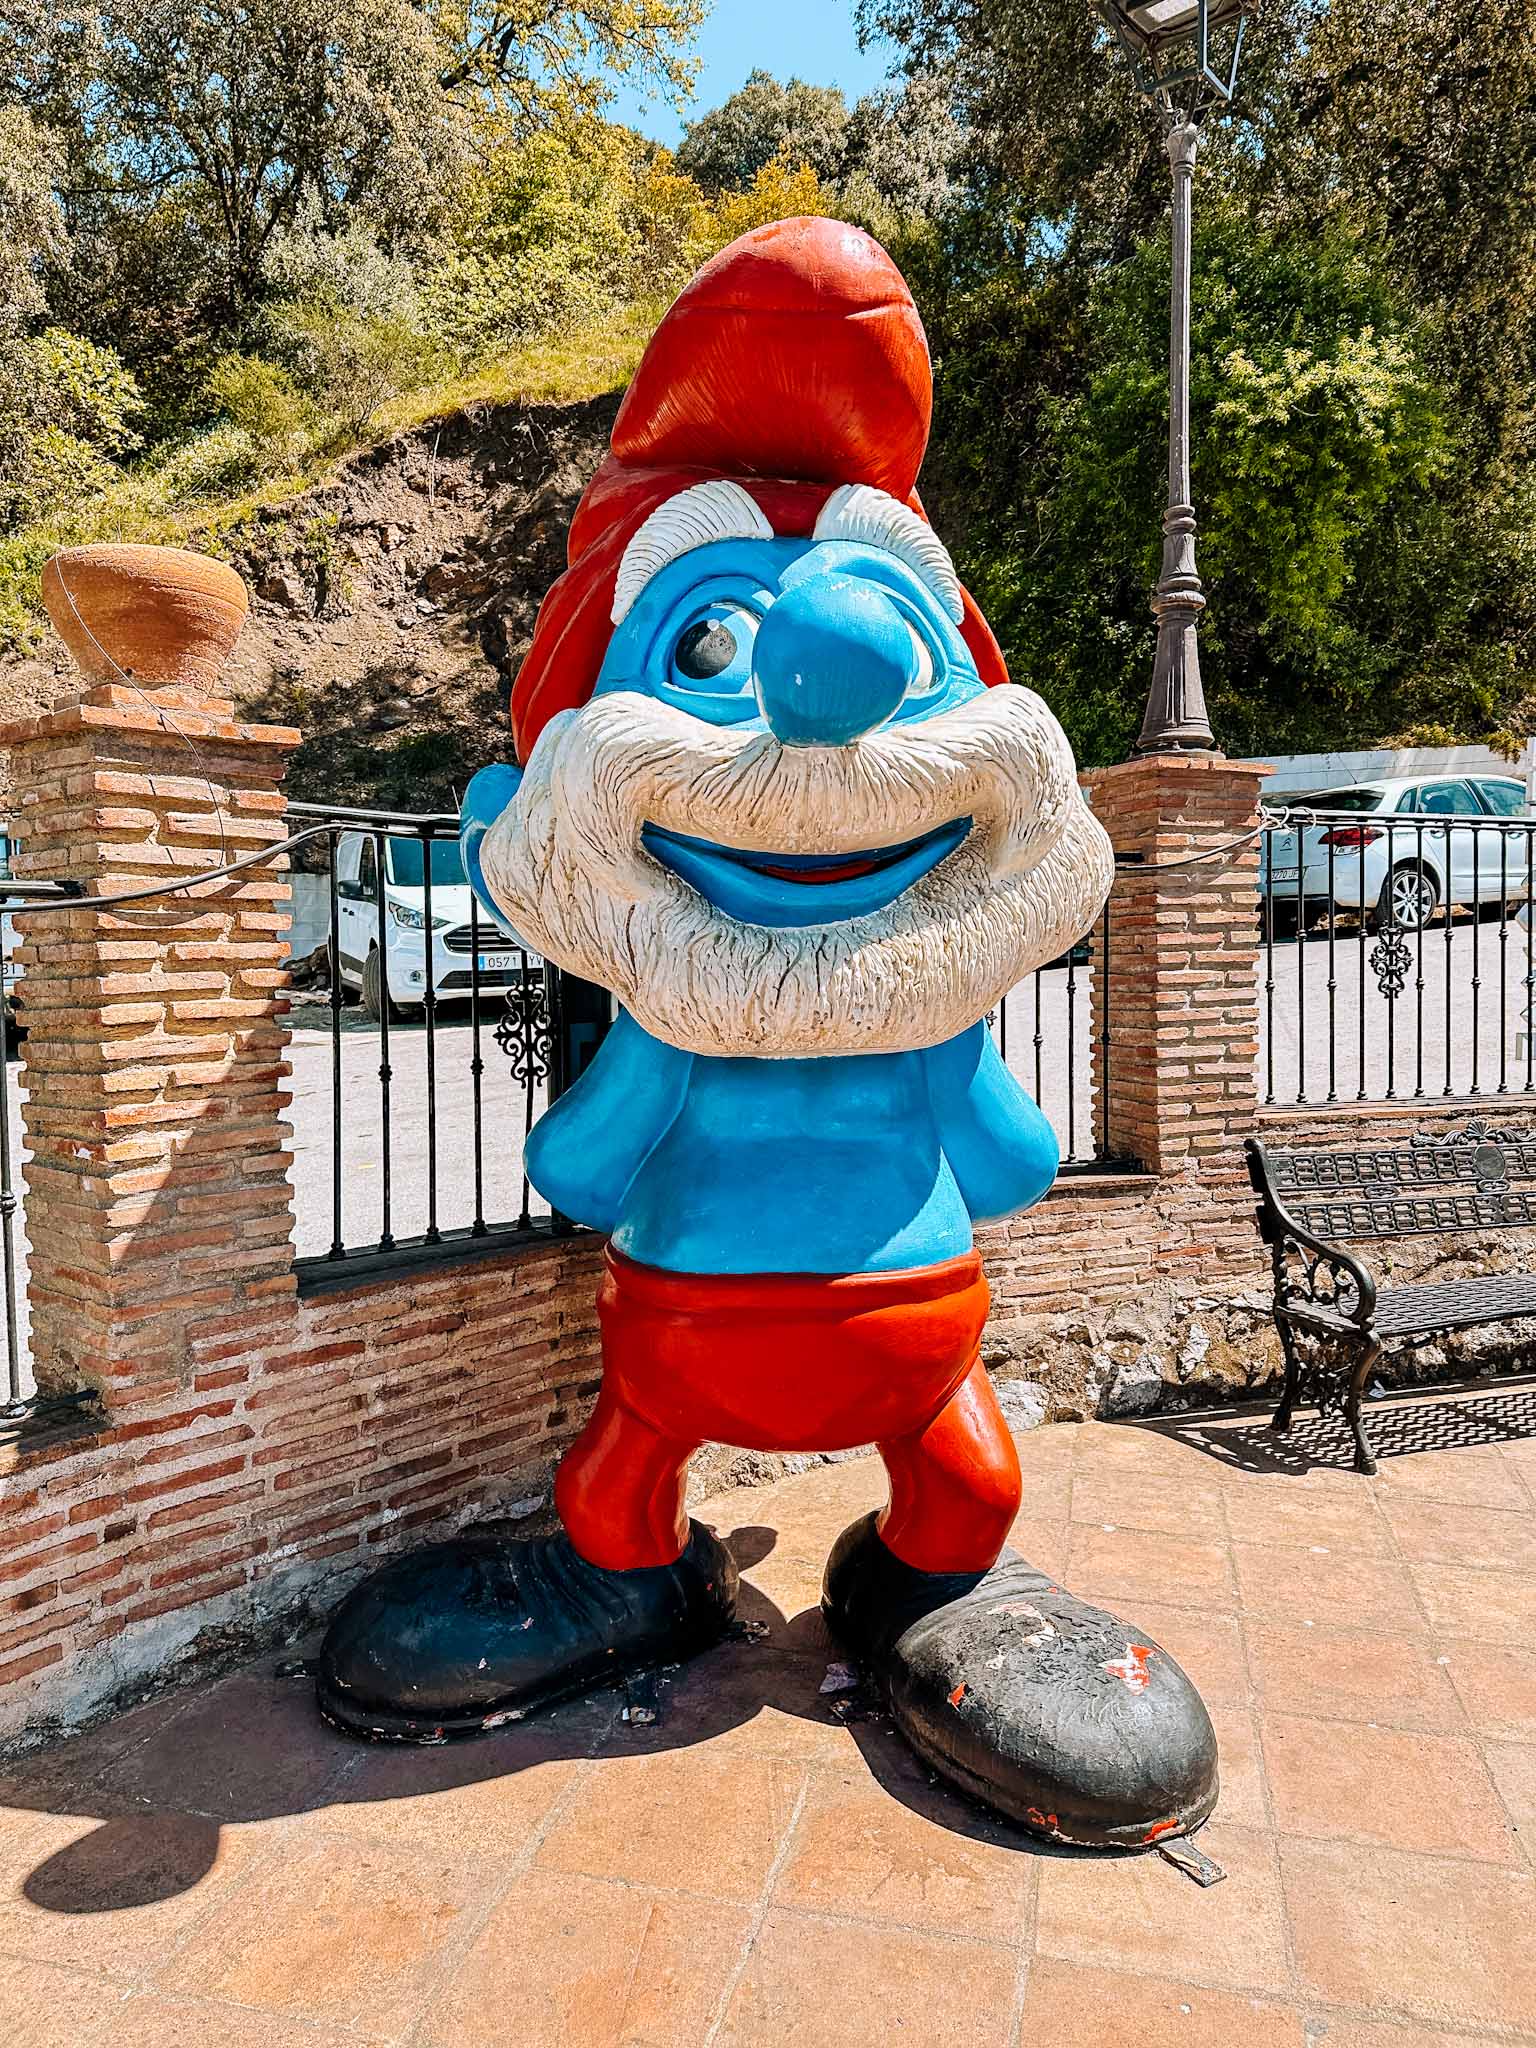 Juzcar, Malaga - best things to do and places to see in the blue Smurf village in Andalusia, Spain